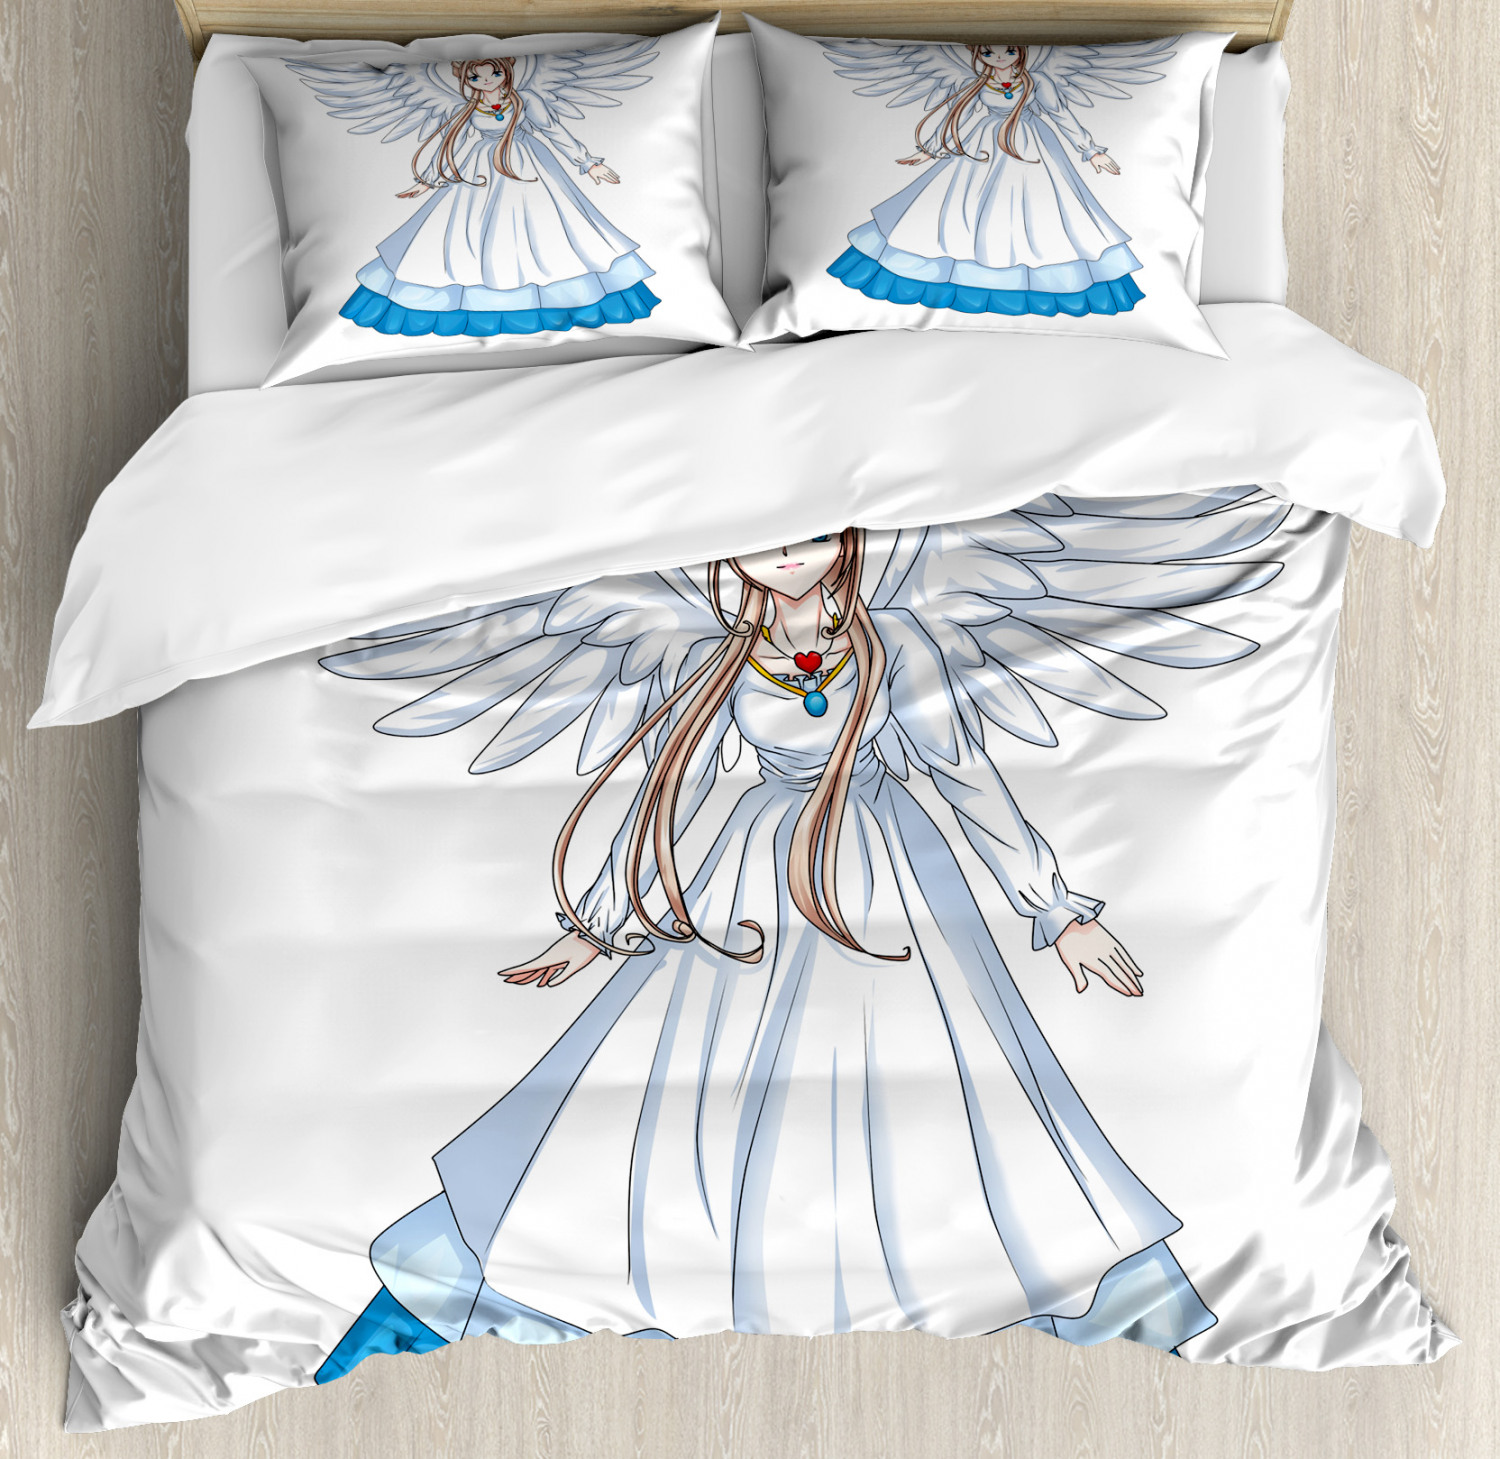 Anime Duvet Cover Set With Pillow Shams Cartoon With Angel